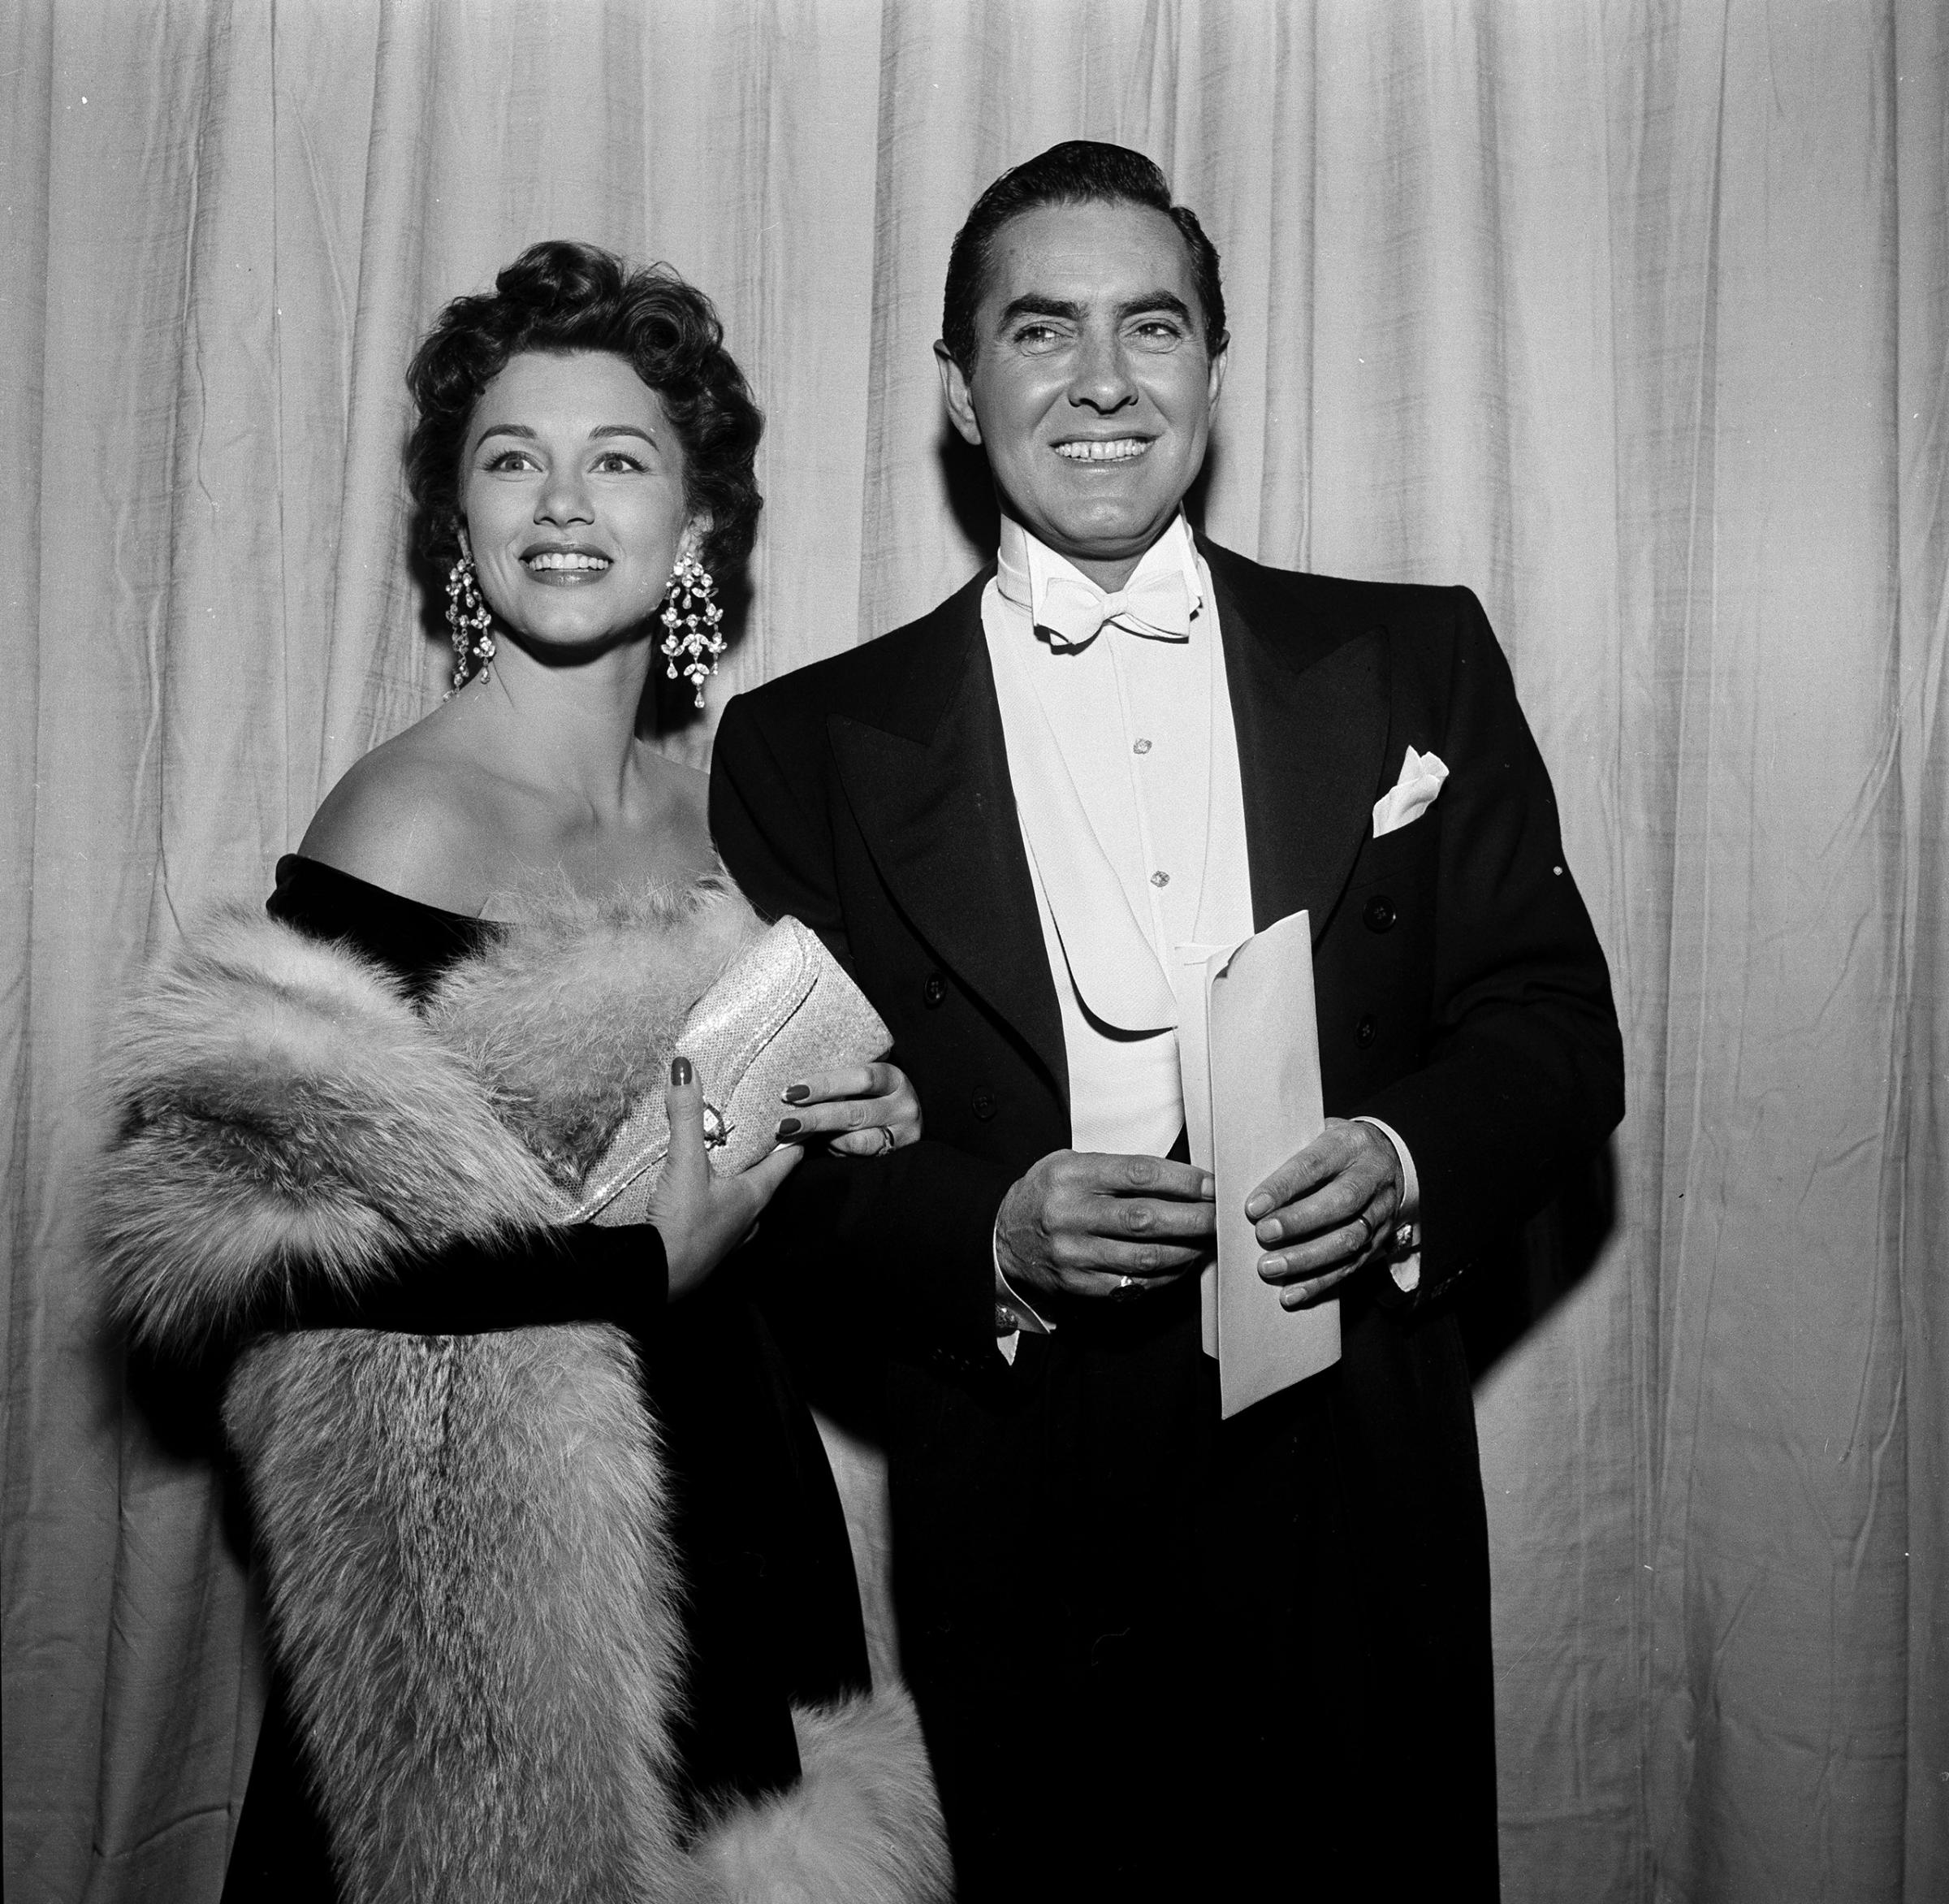 Tyrone Power and his wife Linda Christian at the Academy Awards, 1954.